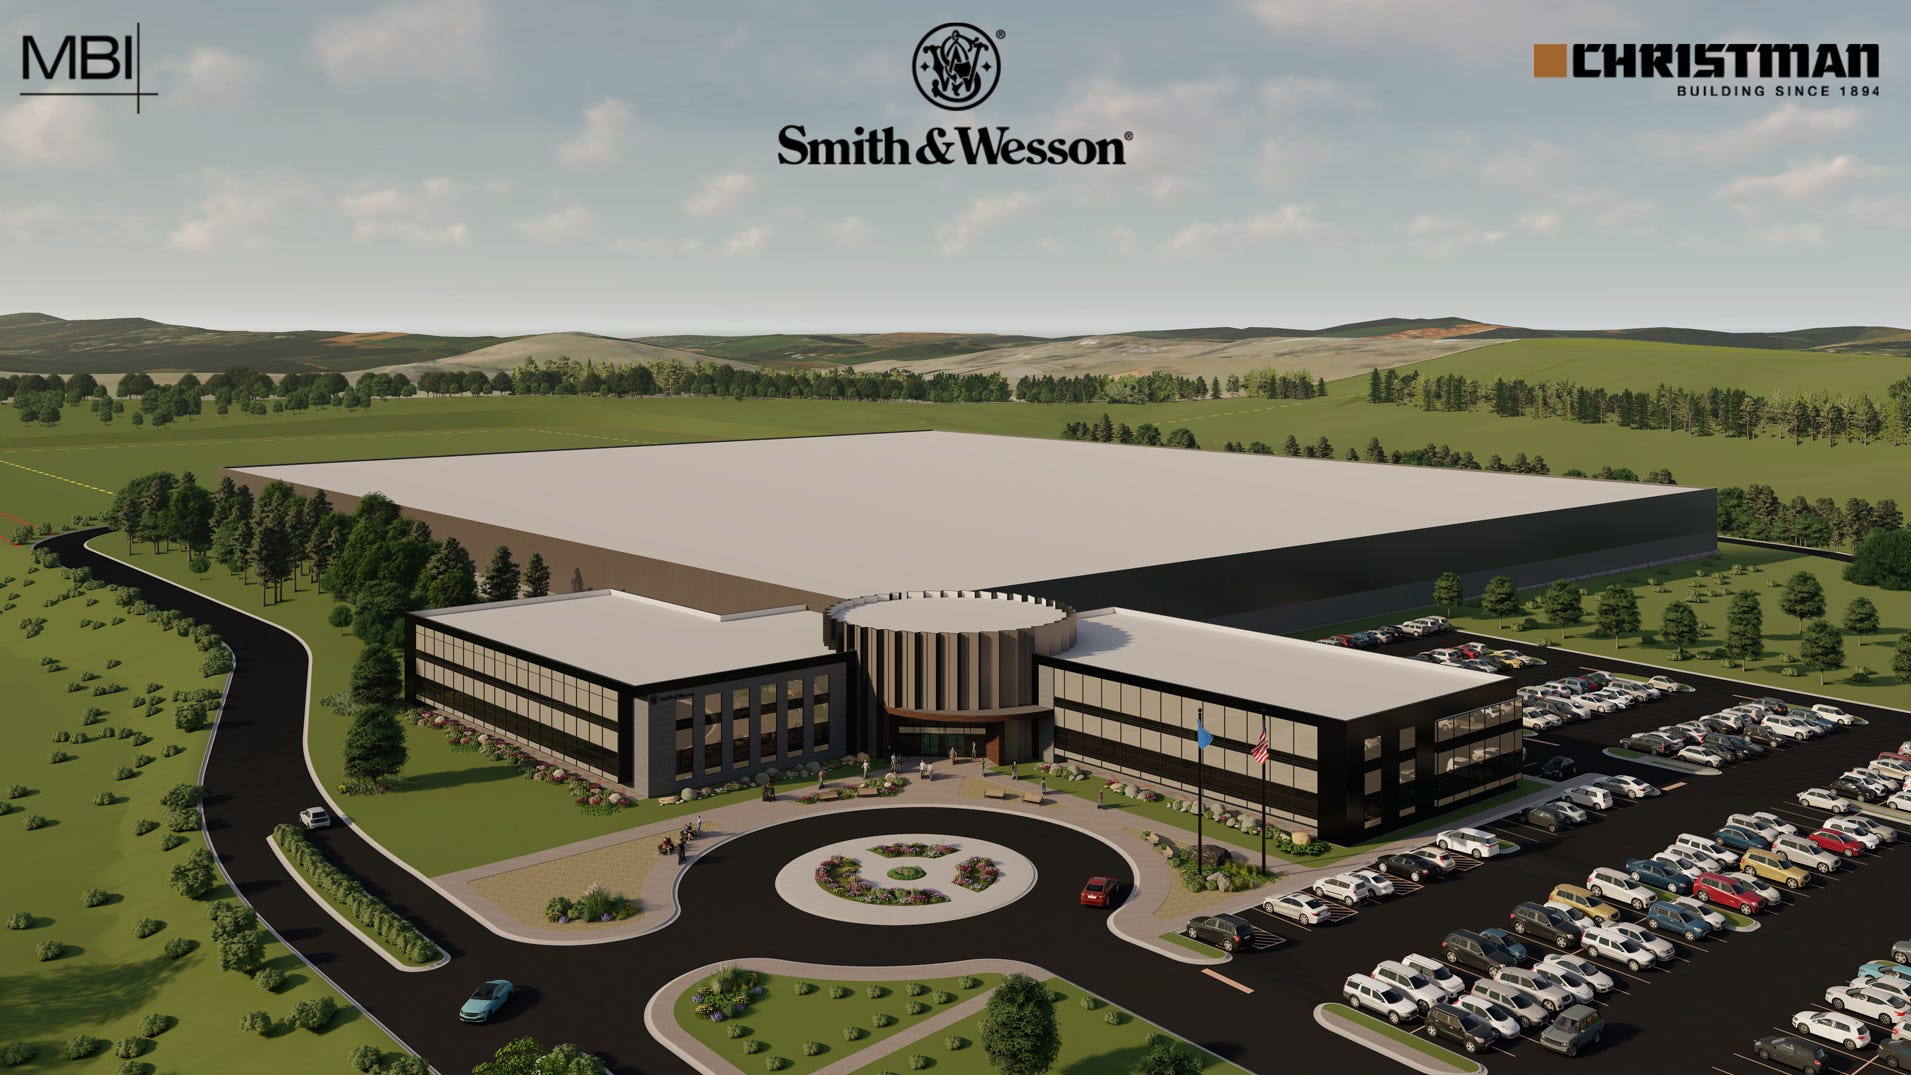 Smith and Wesson in Maryville TN continues Blount County construction